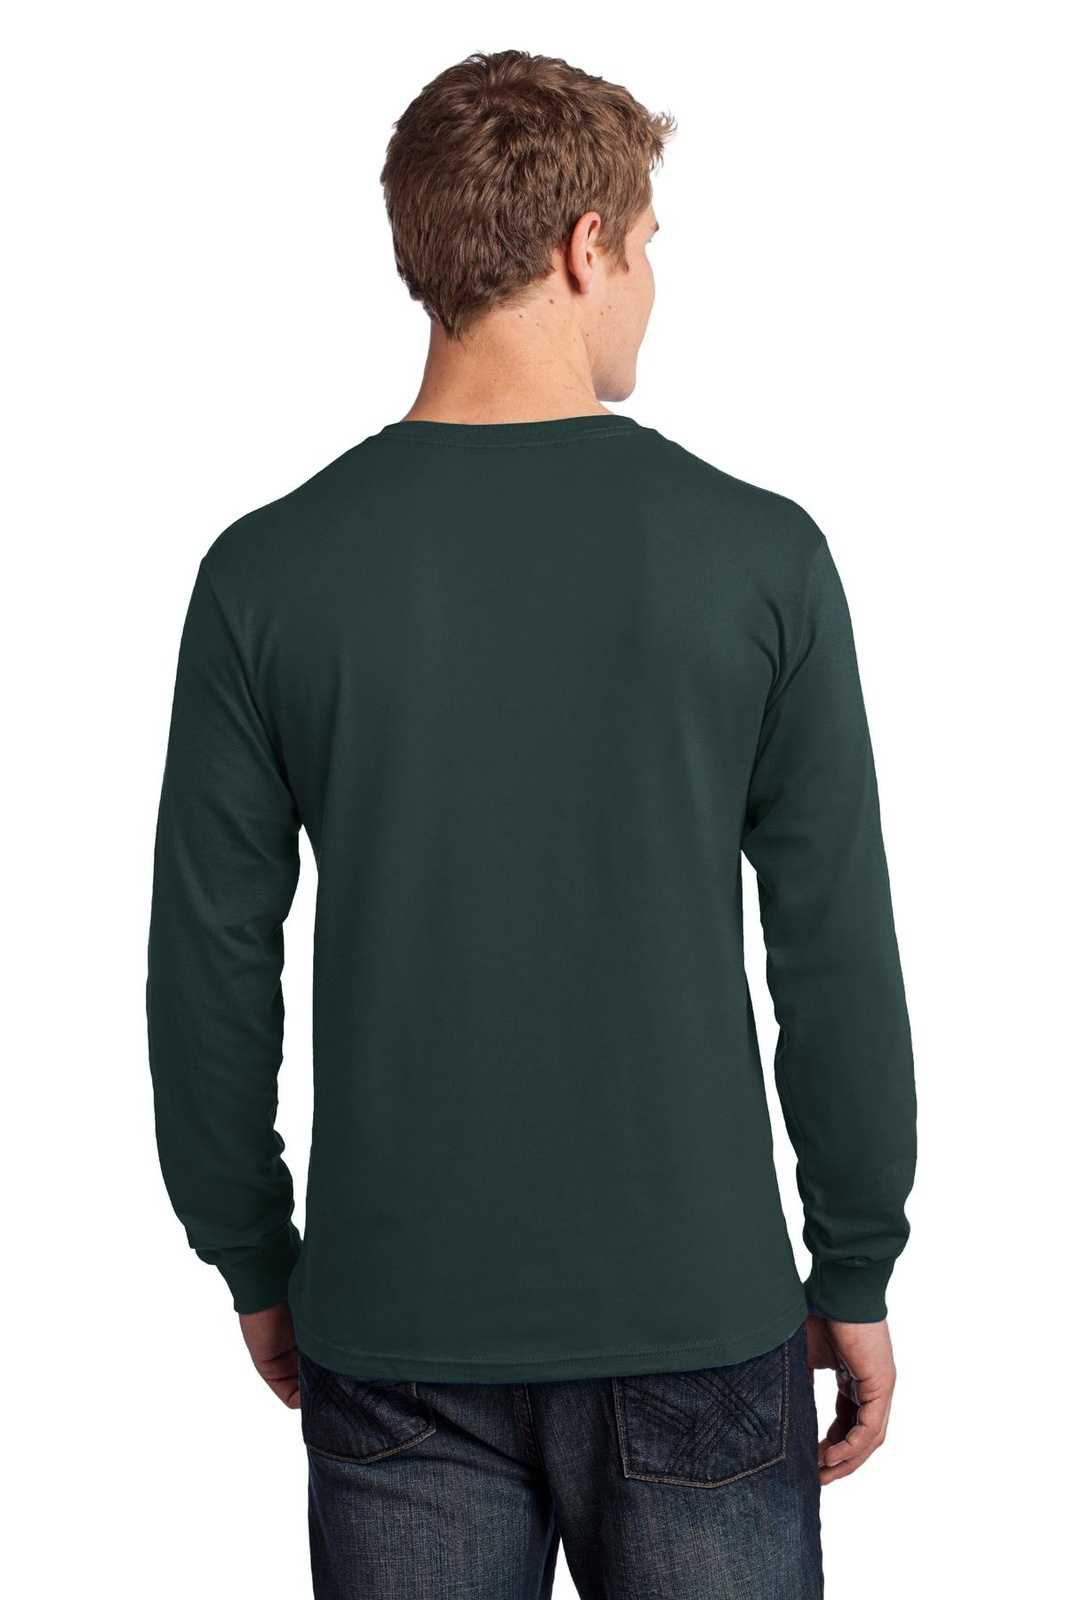 Port & Company PC54LS Long Sleeve Core Cotton Tee - Dark Green - HIT a Double - 1